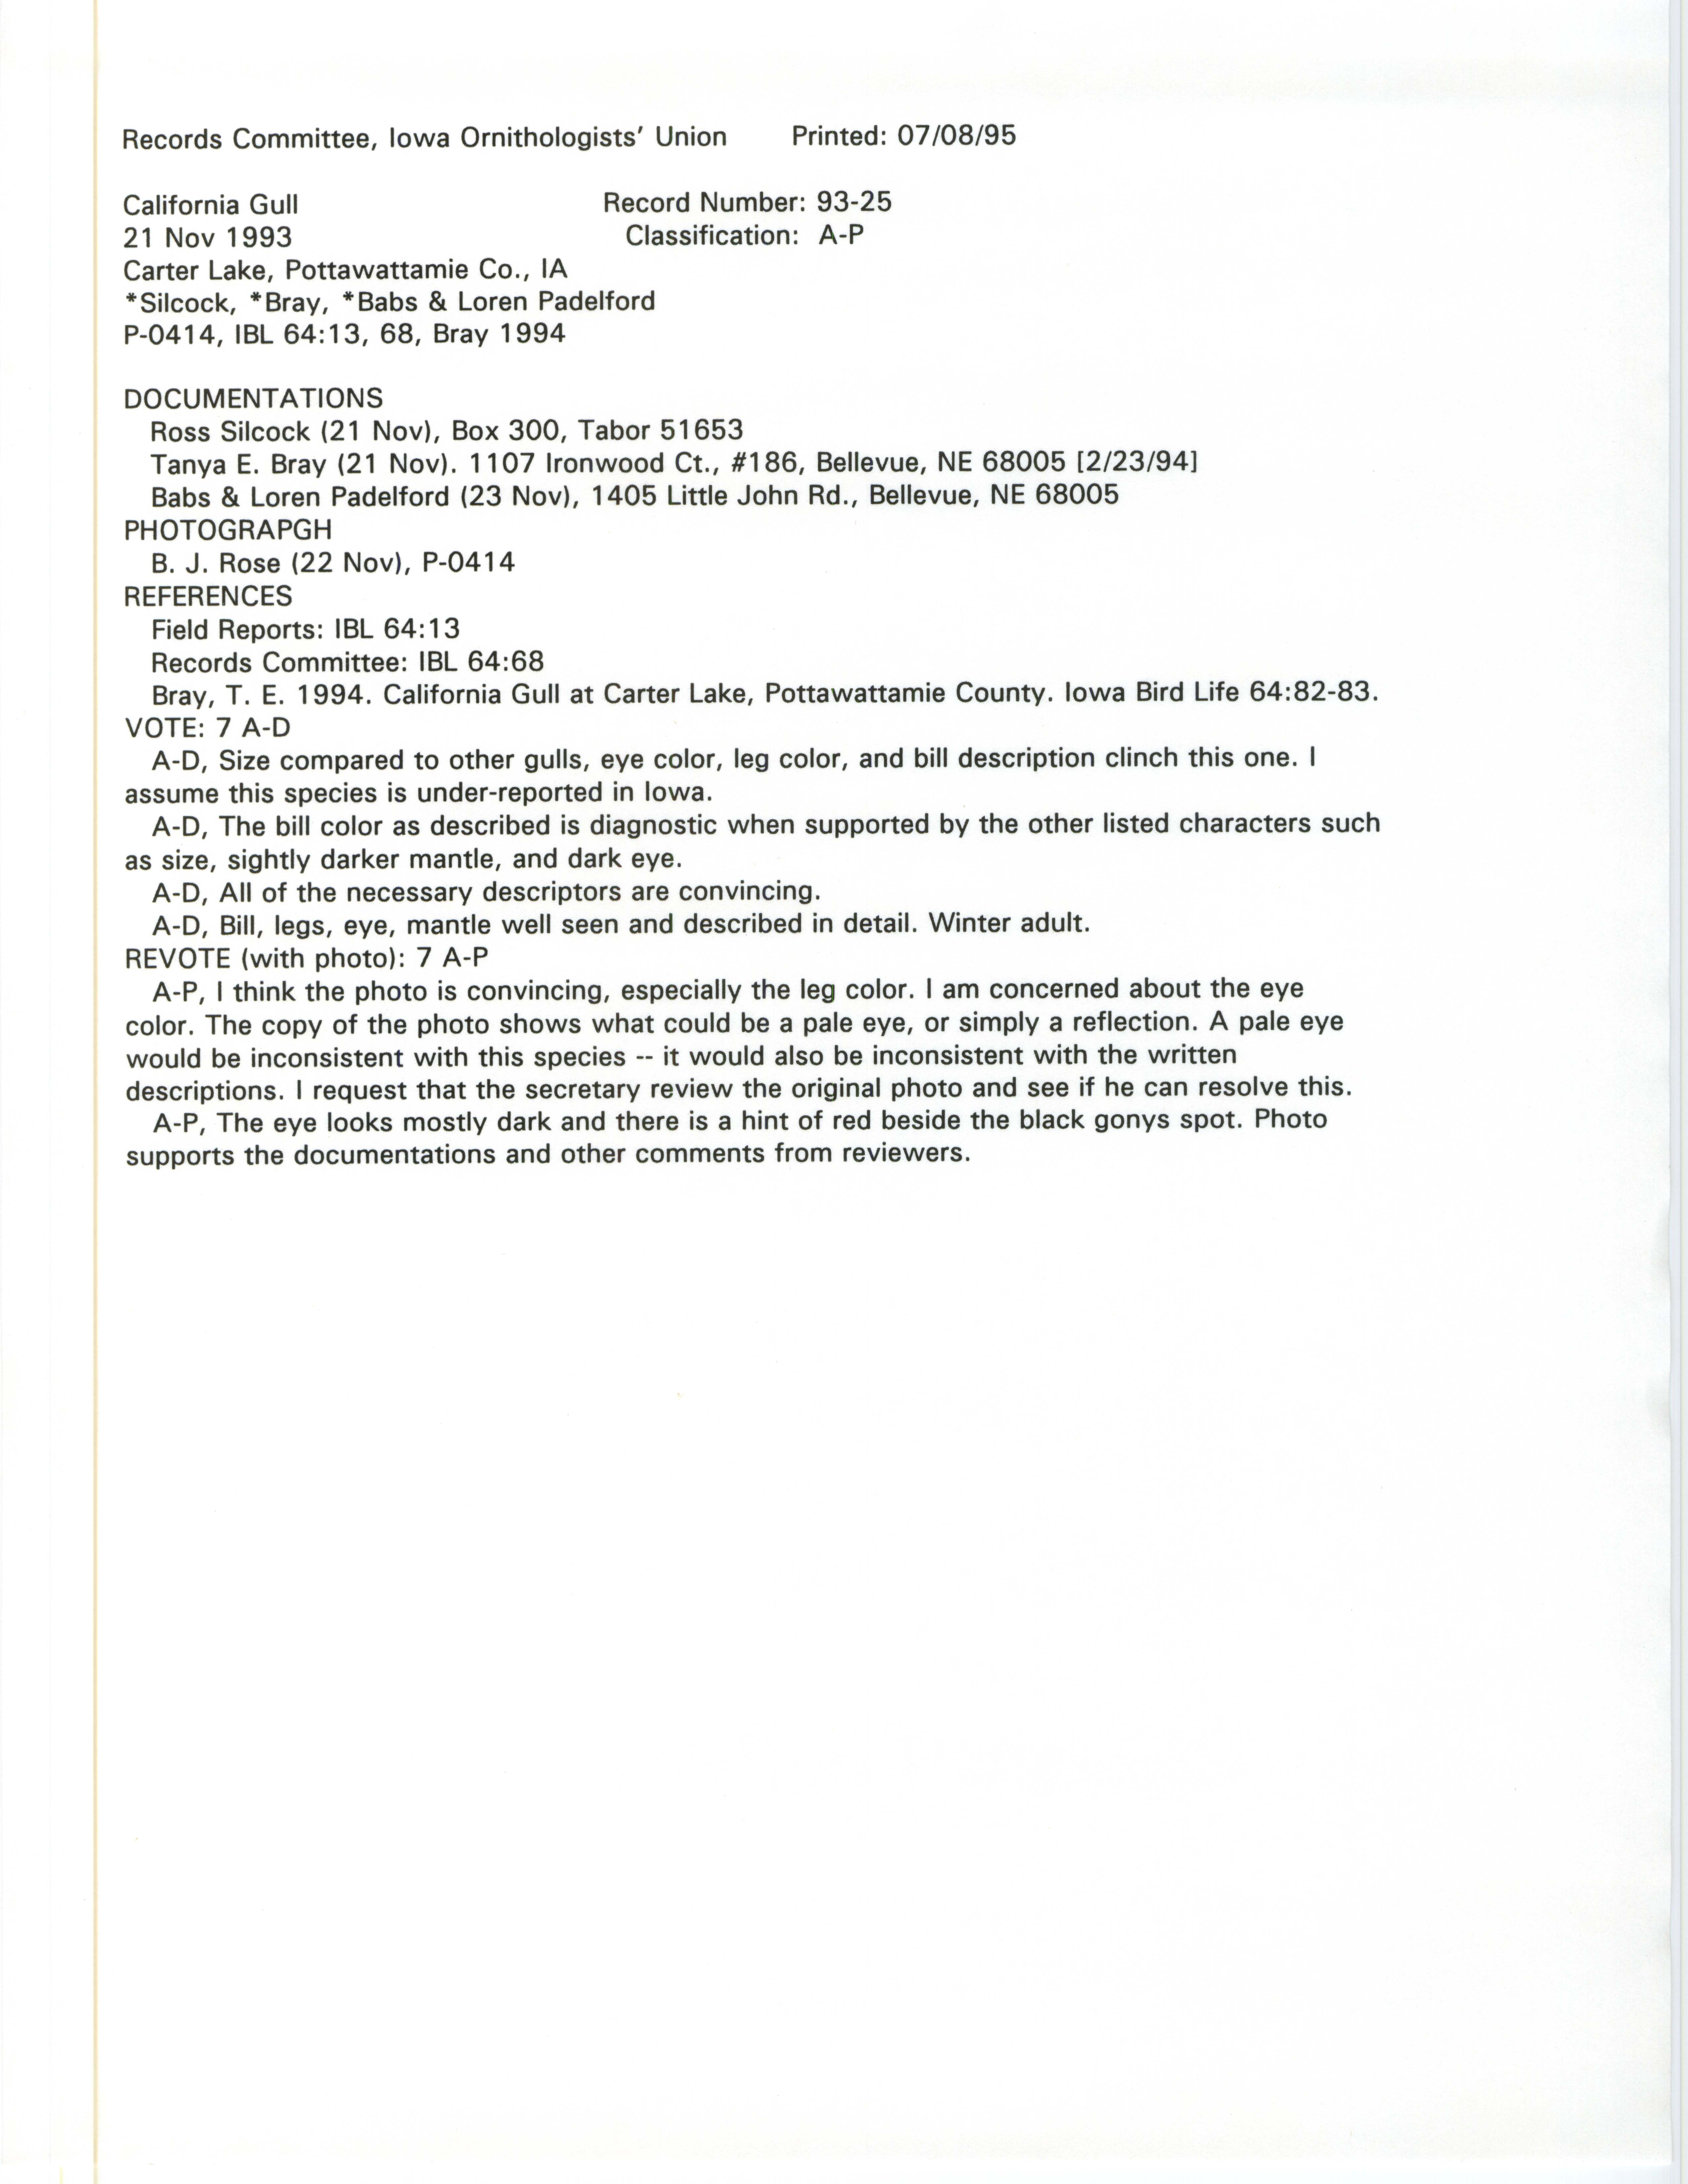 Records Committee review for rare bird sighting of California Gull at Carter Lake, 1993